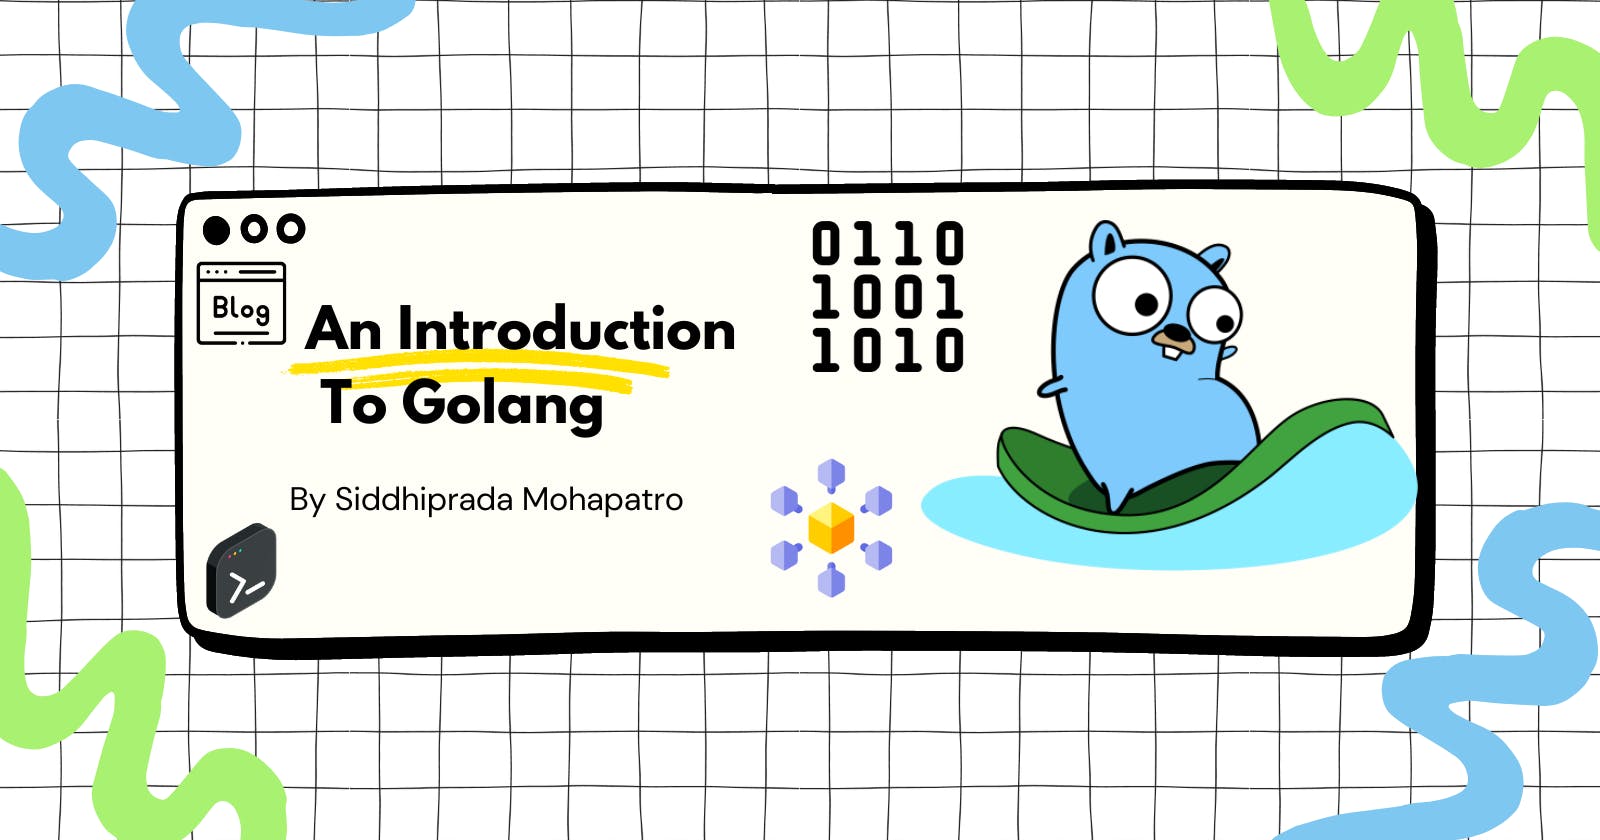 An Introduction To Golang